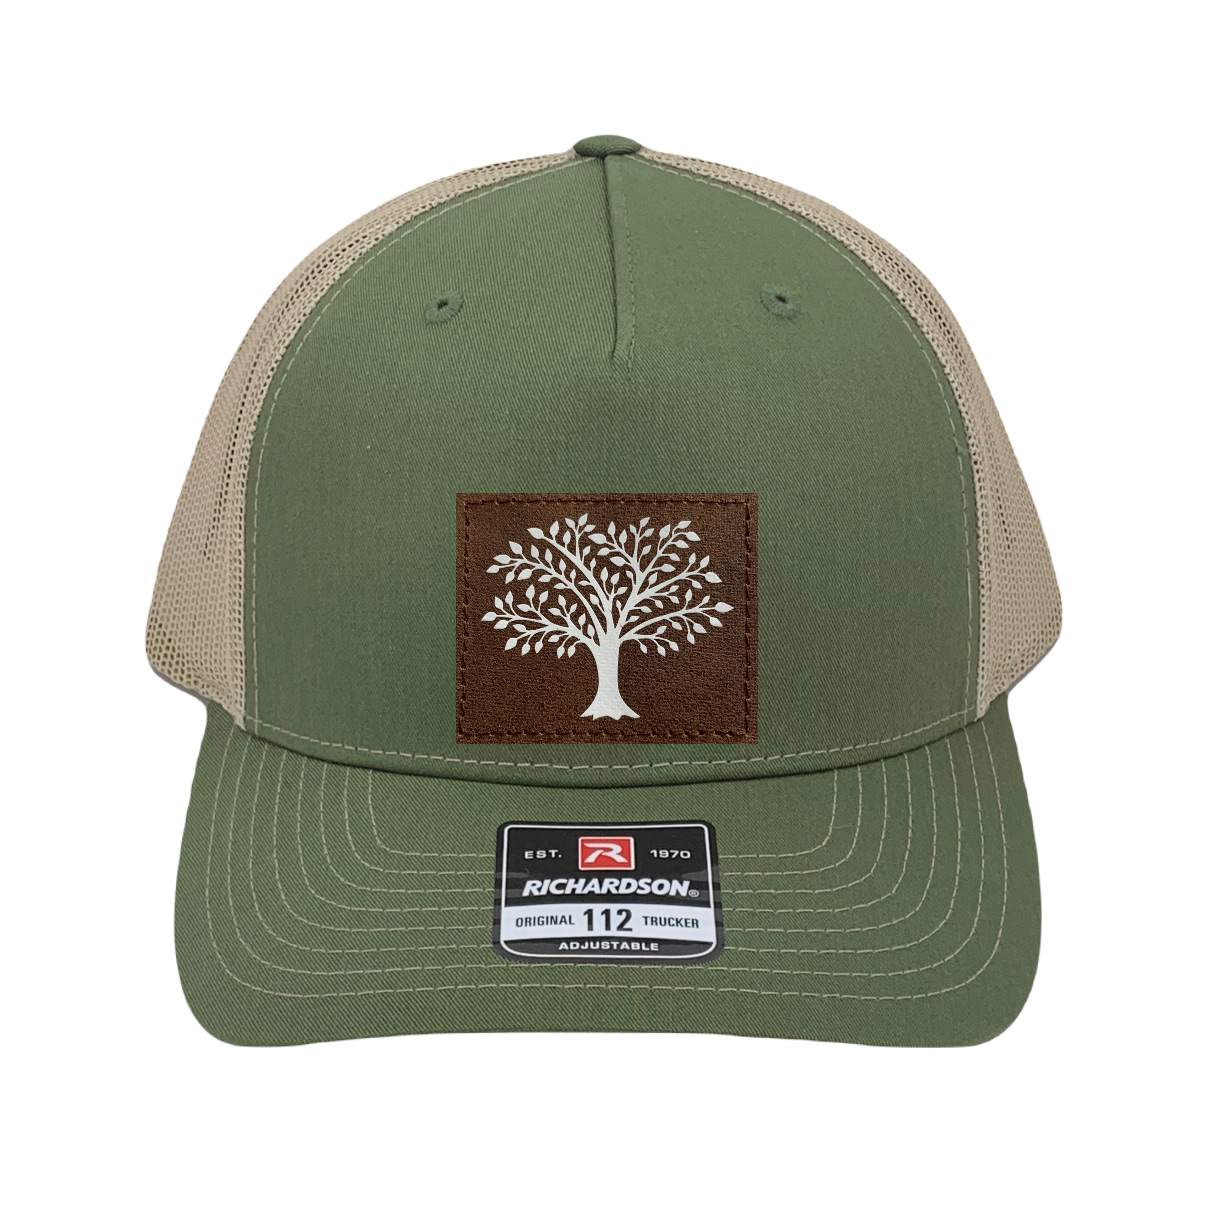 Richardson 112, Five Panel Trucker Hat, Olive/Tan with Tree of Life